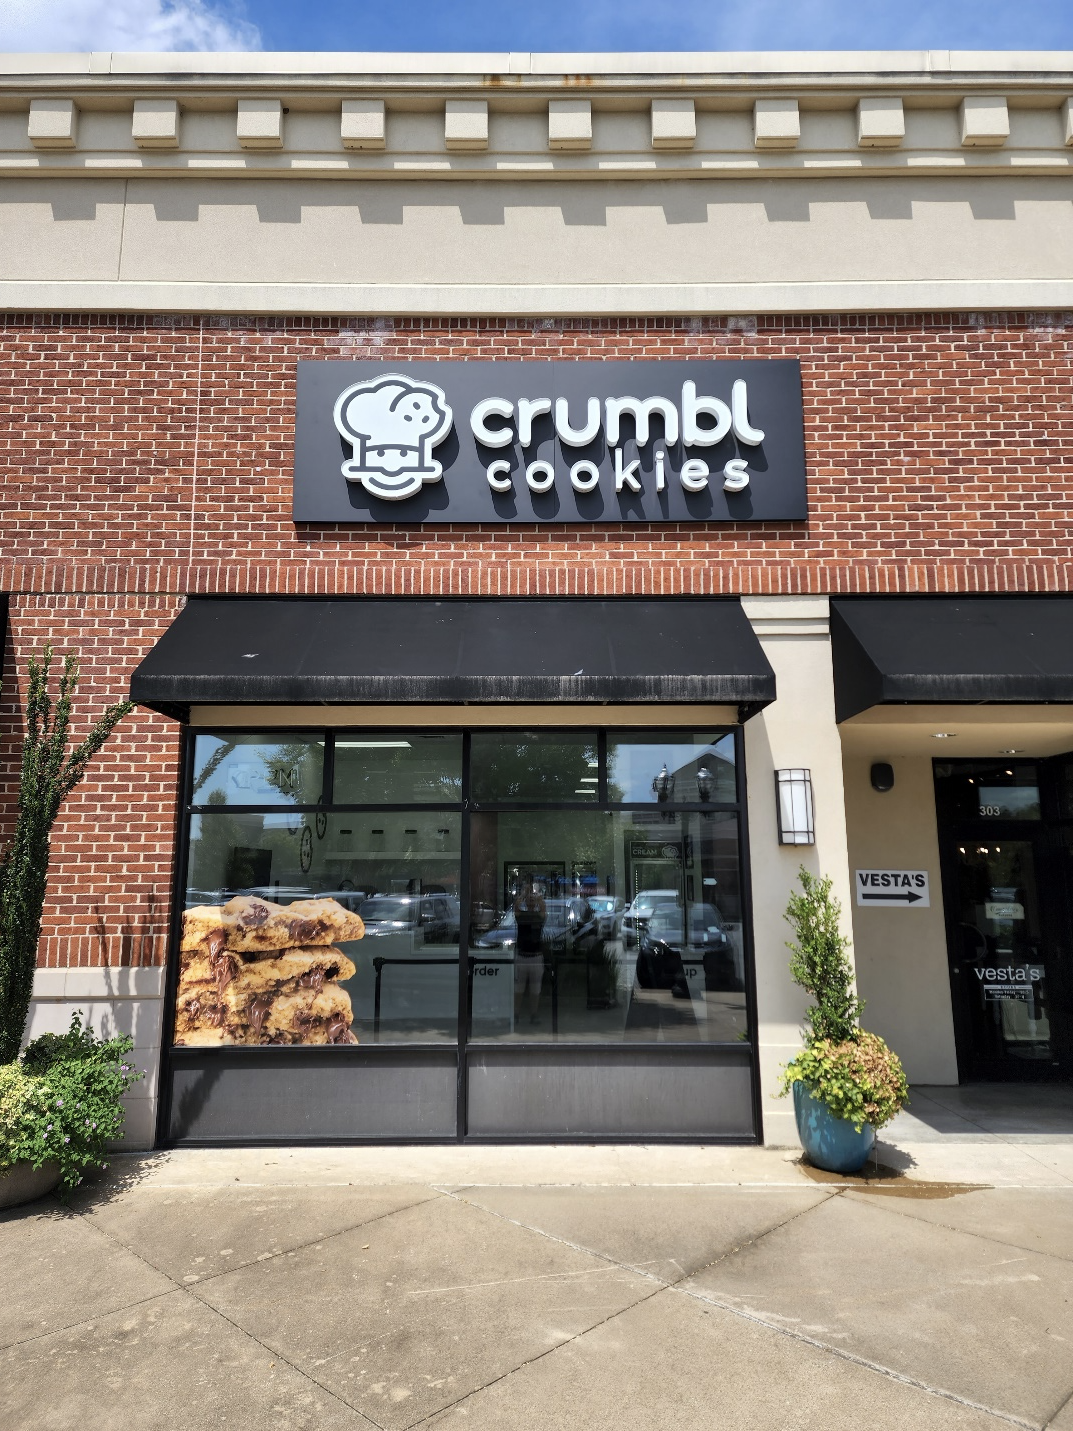 Crumbl Cookies - Cantrell